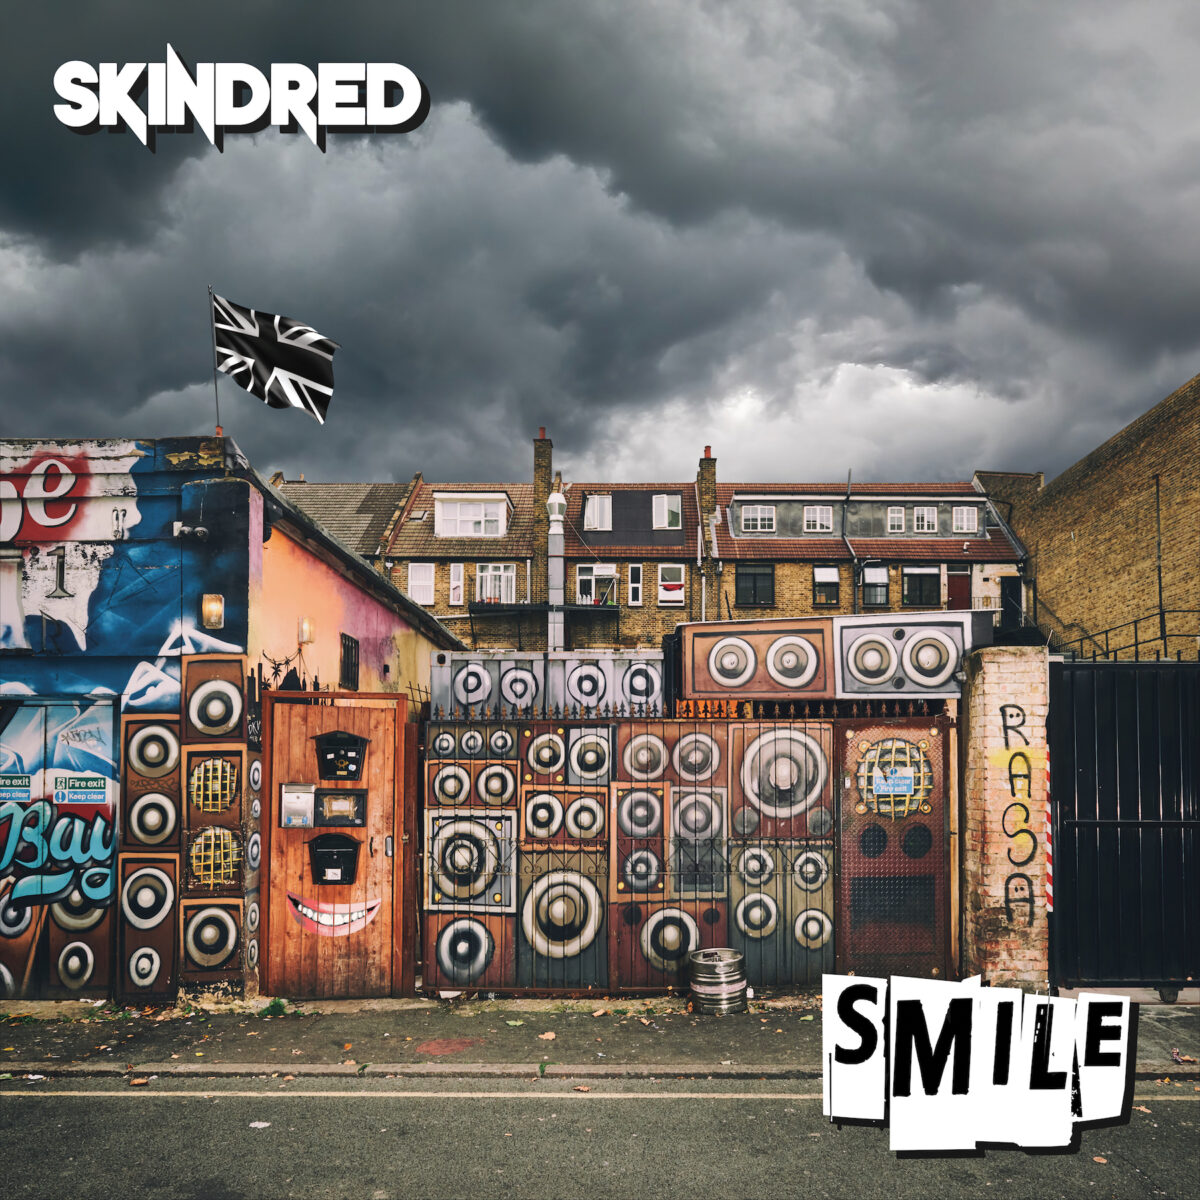 Skindred reach 2 in the Official UK Chart with new album 'Smile' Laney